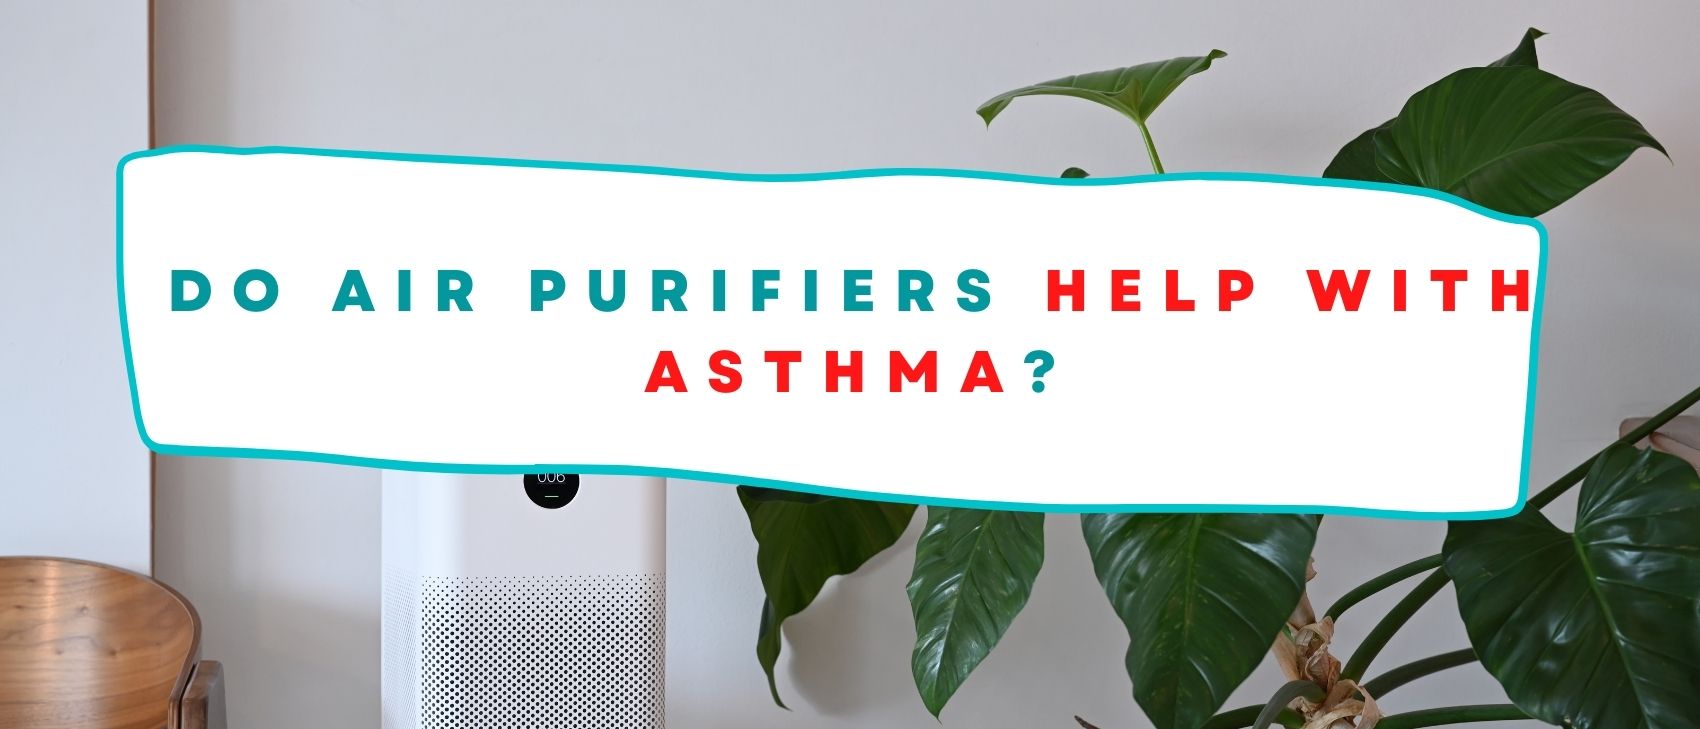 Do air purifiers help with asthma?